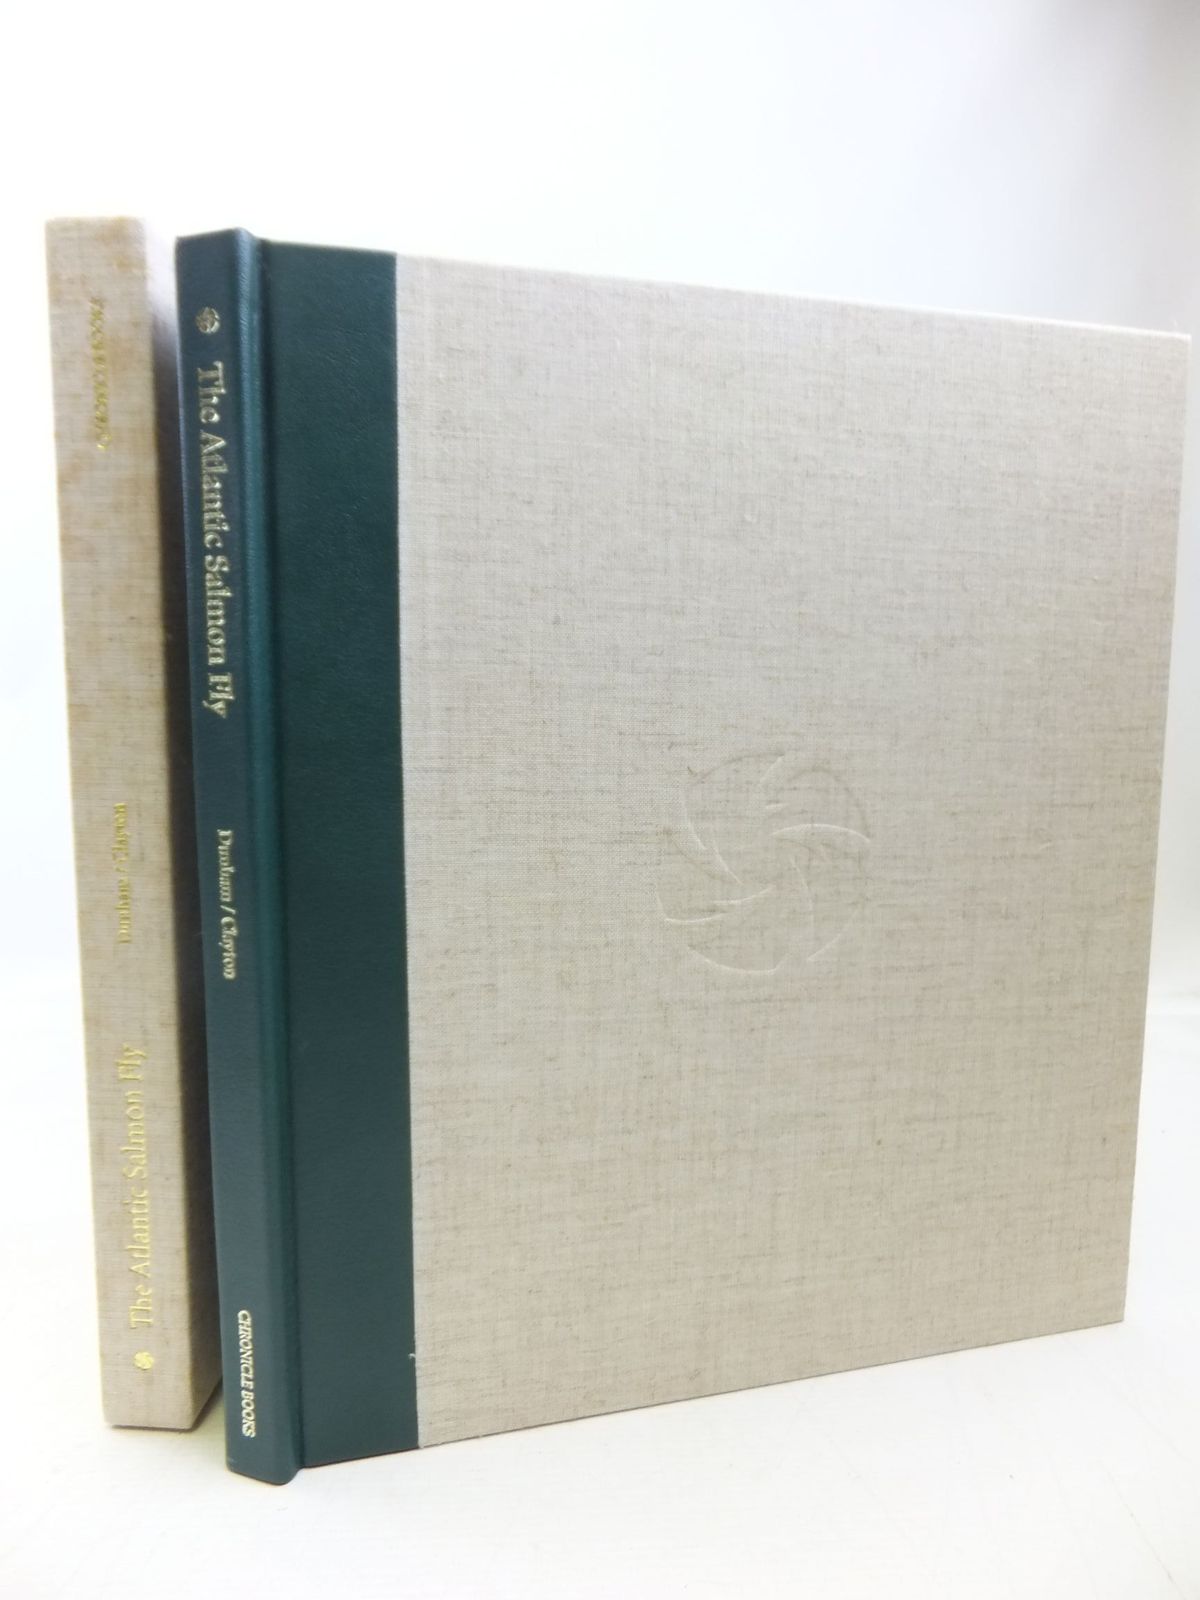 Photo of THE ATLANTIC SALMON FLY written by Dunham, Judith published by Chronicle Books (STOCK CODE: 2118408)  for sale by Stella & Rose's Books